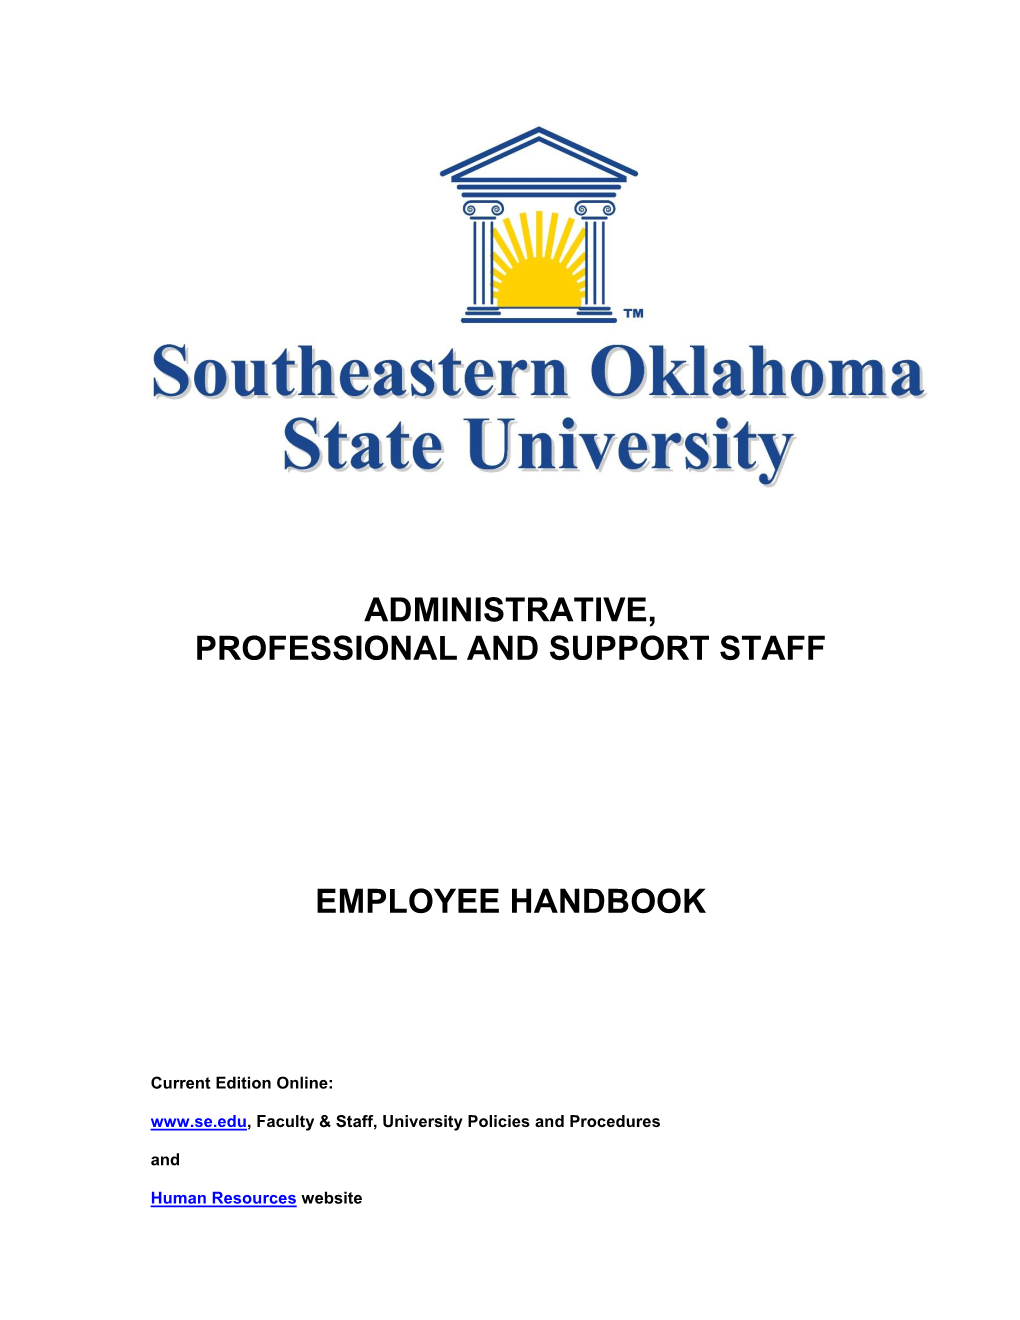 Administrative, Professional and Support Staff Employee Handbook